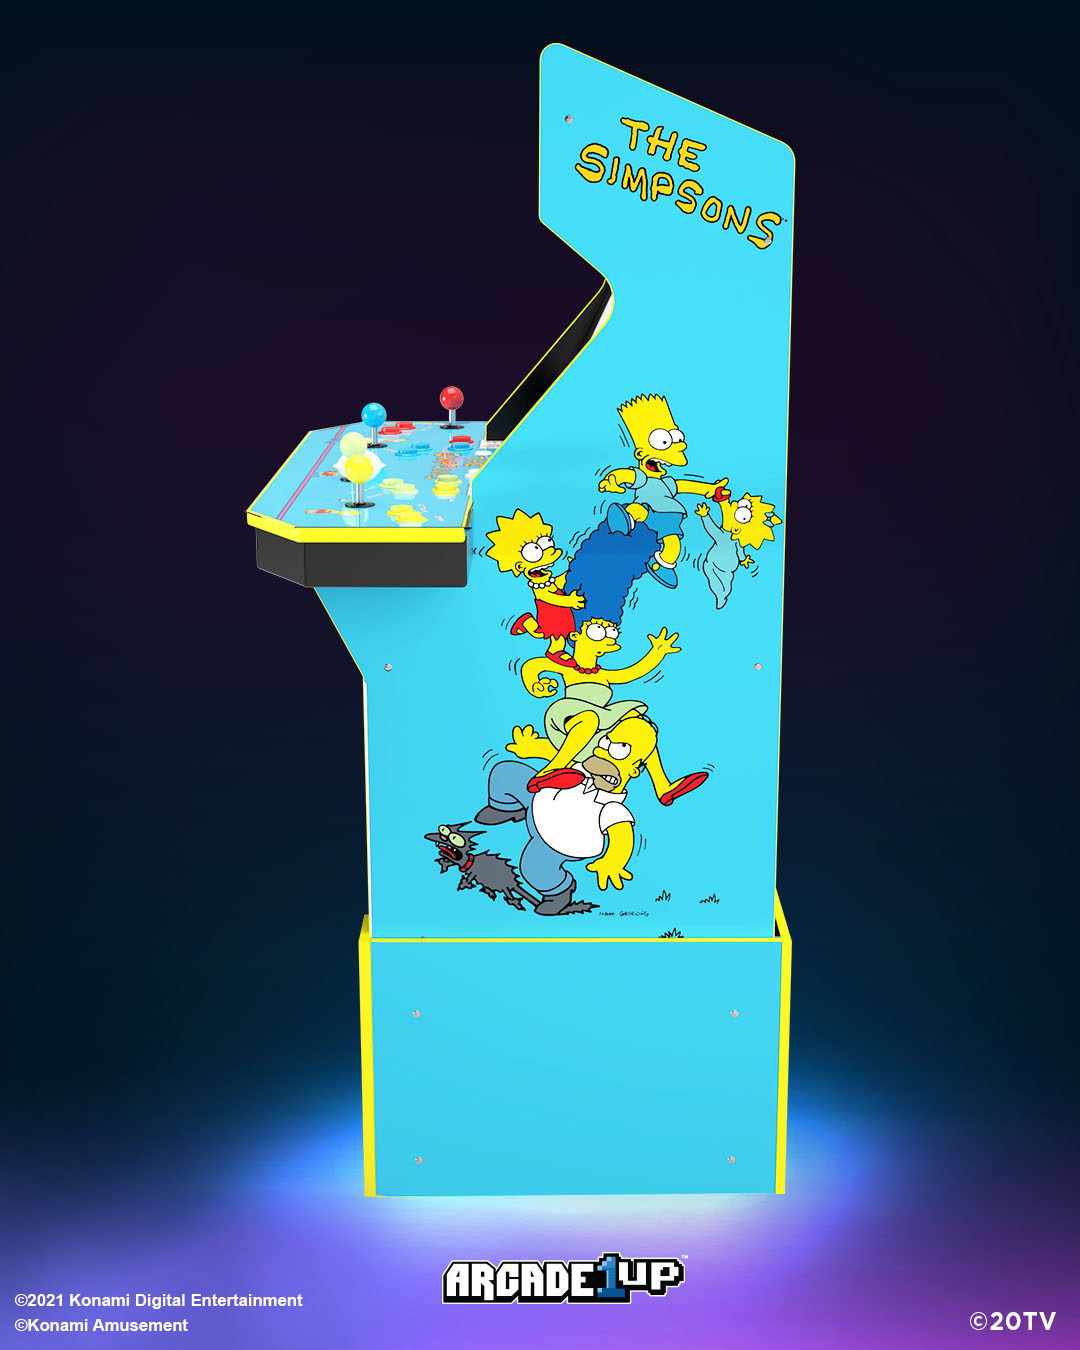 Introducing Arcade1Up's Simpson's At-Home Arcade Machine!